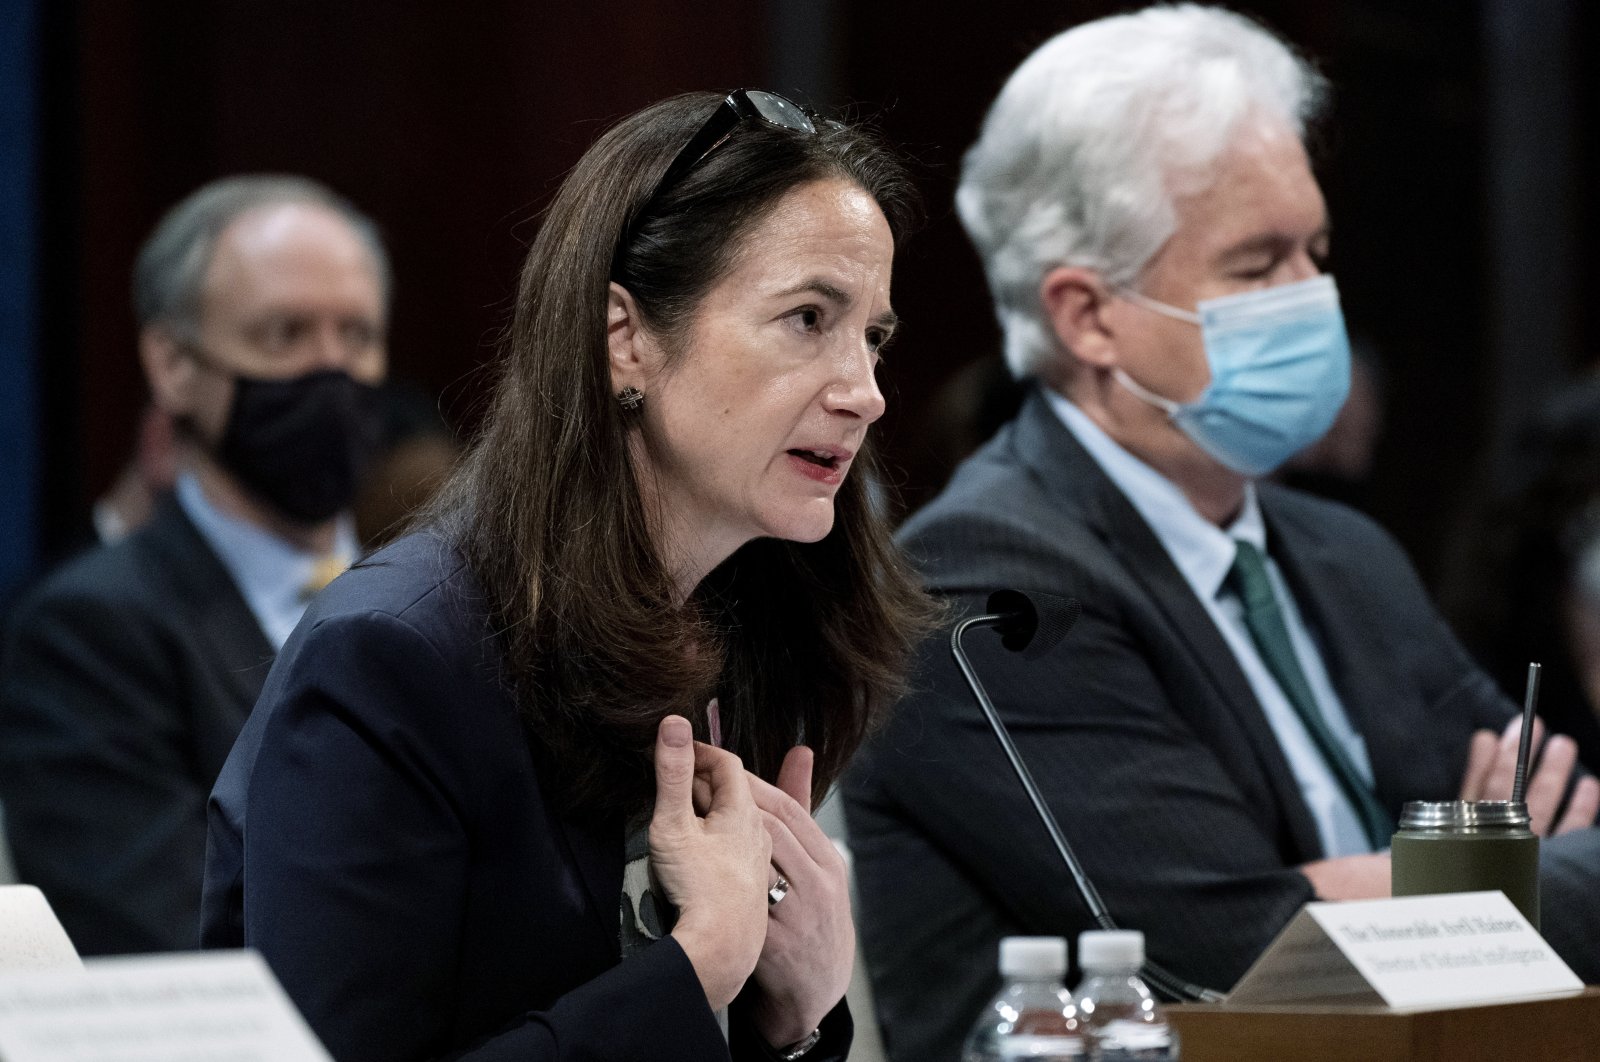 Director of National Intelligence Avril Haines, (L), next to CIA Director William Burns, testifies at a House Intelligence Committee hearing on diversity and equity in the intelligence community on Capitol Hill in Washington, D.C., U.S, Oct. 27, 2021. (AP Photo)